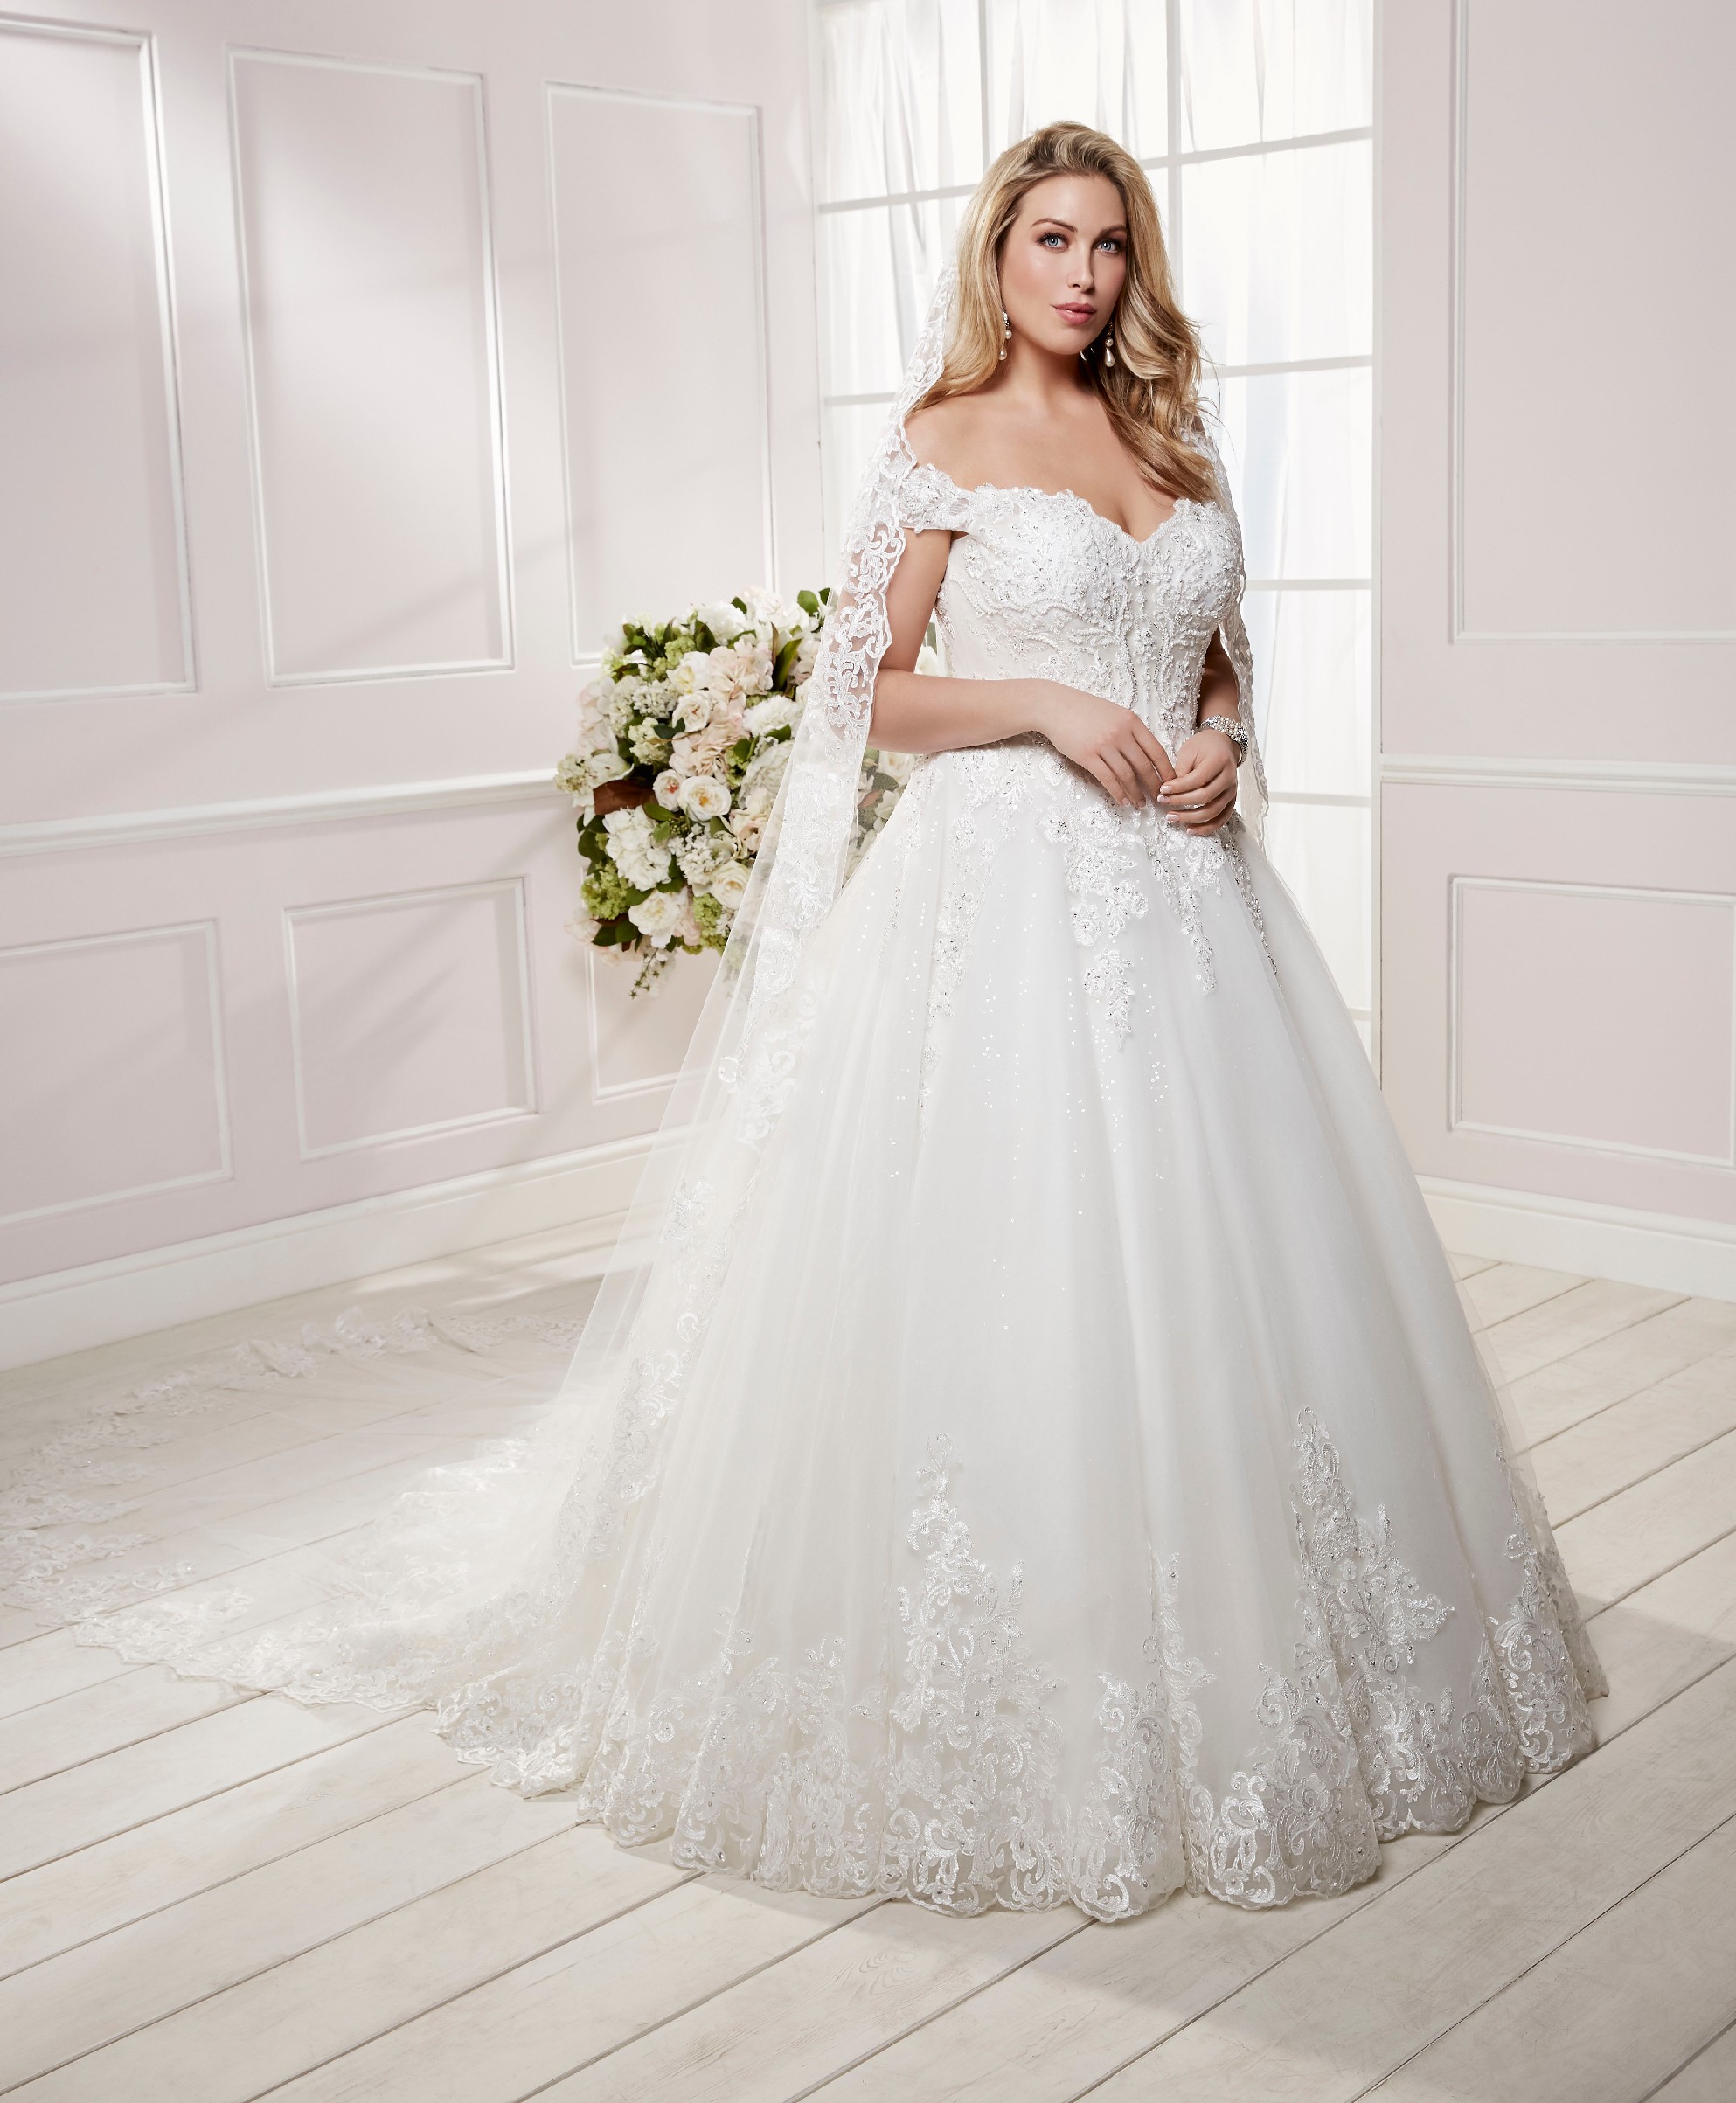 Curvy model in Ronald Joyce plus size wedding dress style 69479, an off-the-shoulder ivory lace ballgown 